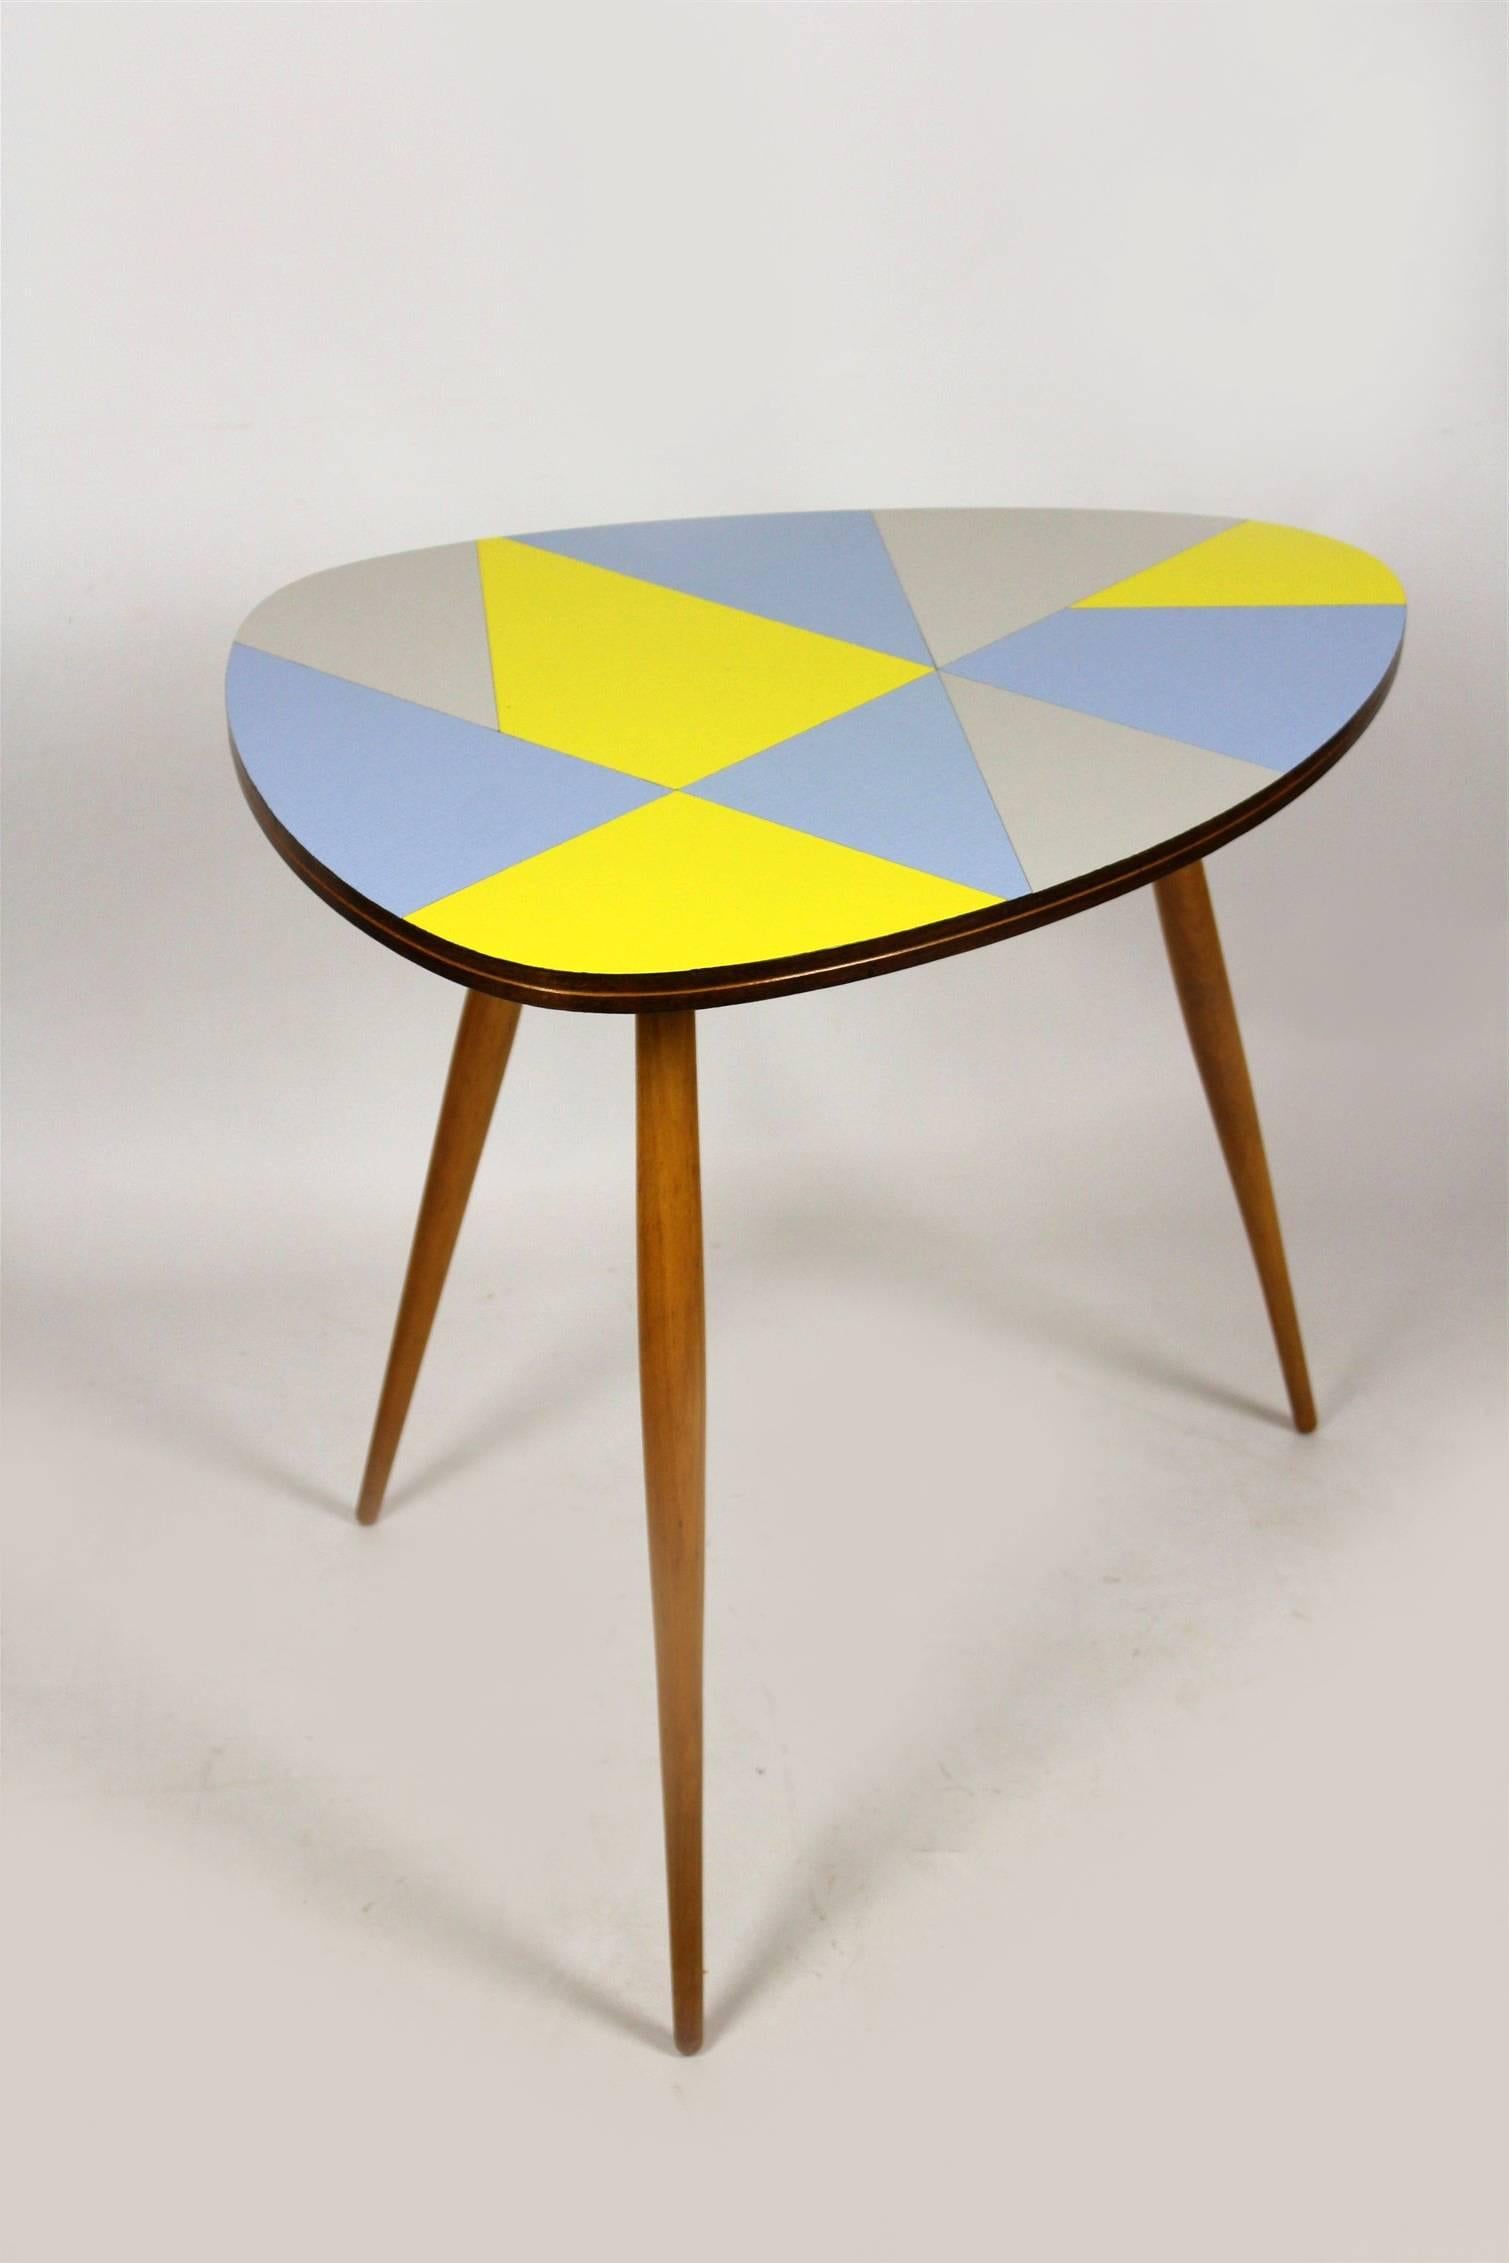 This beautiful coffee table features the original laminate top with a multicolored geometrical pattern. It has been produced in Czech Republic in the 1960s. The legs are screwed in, can be simply removed.